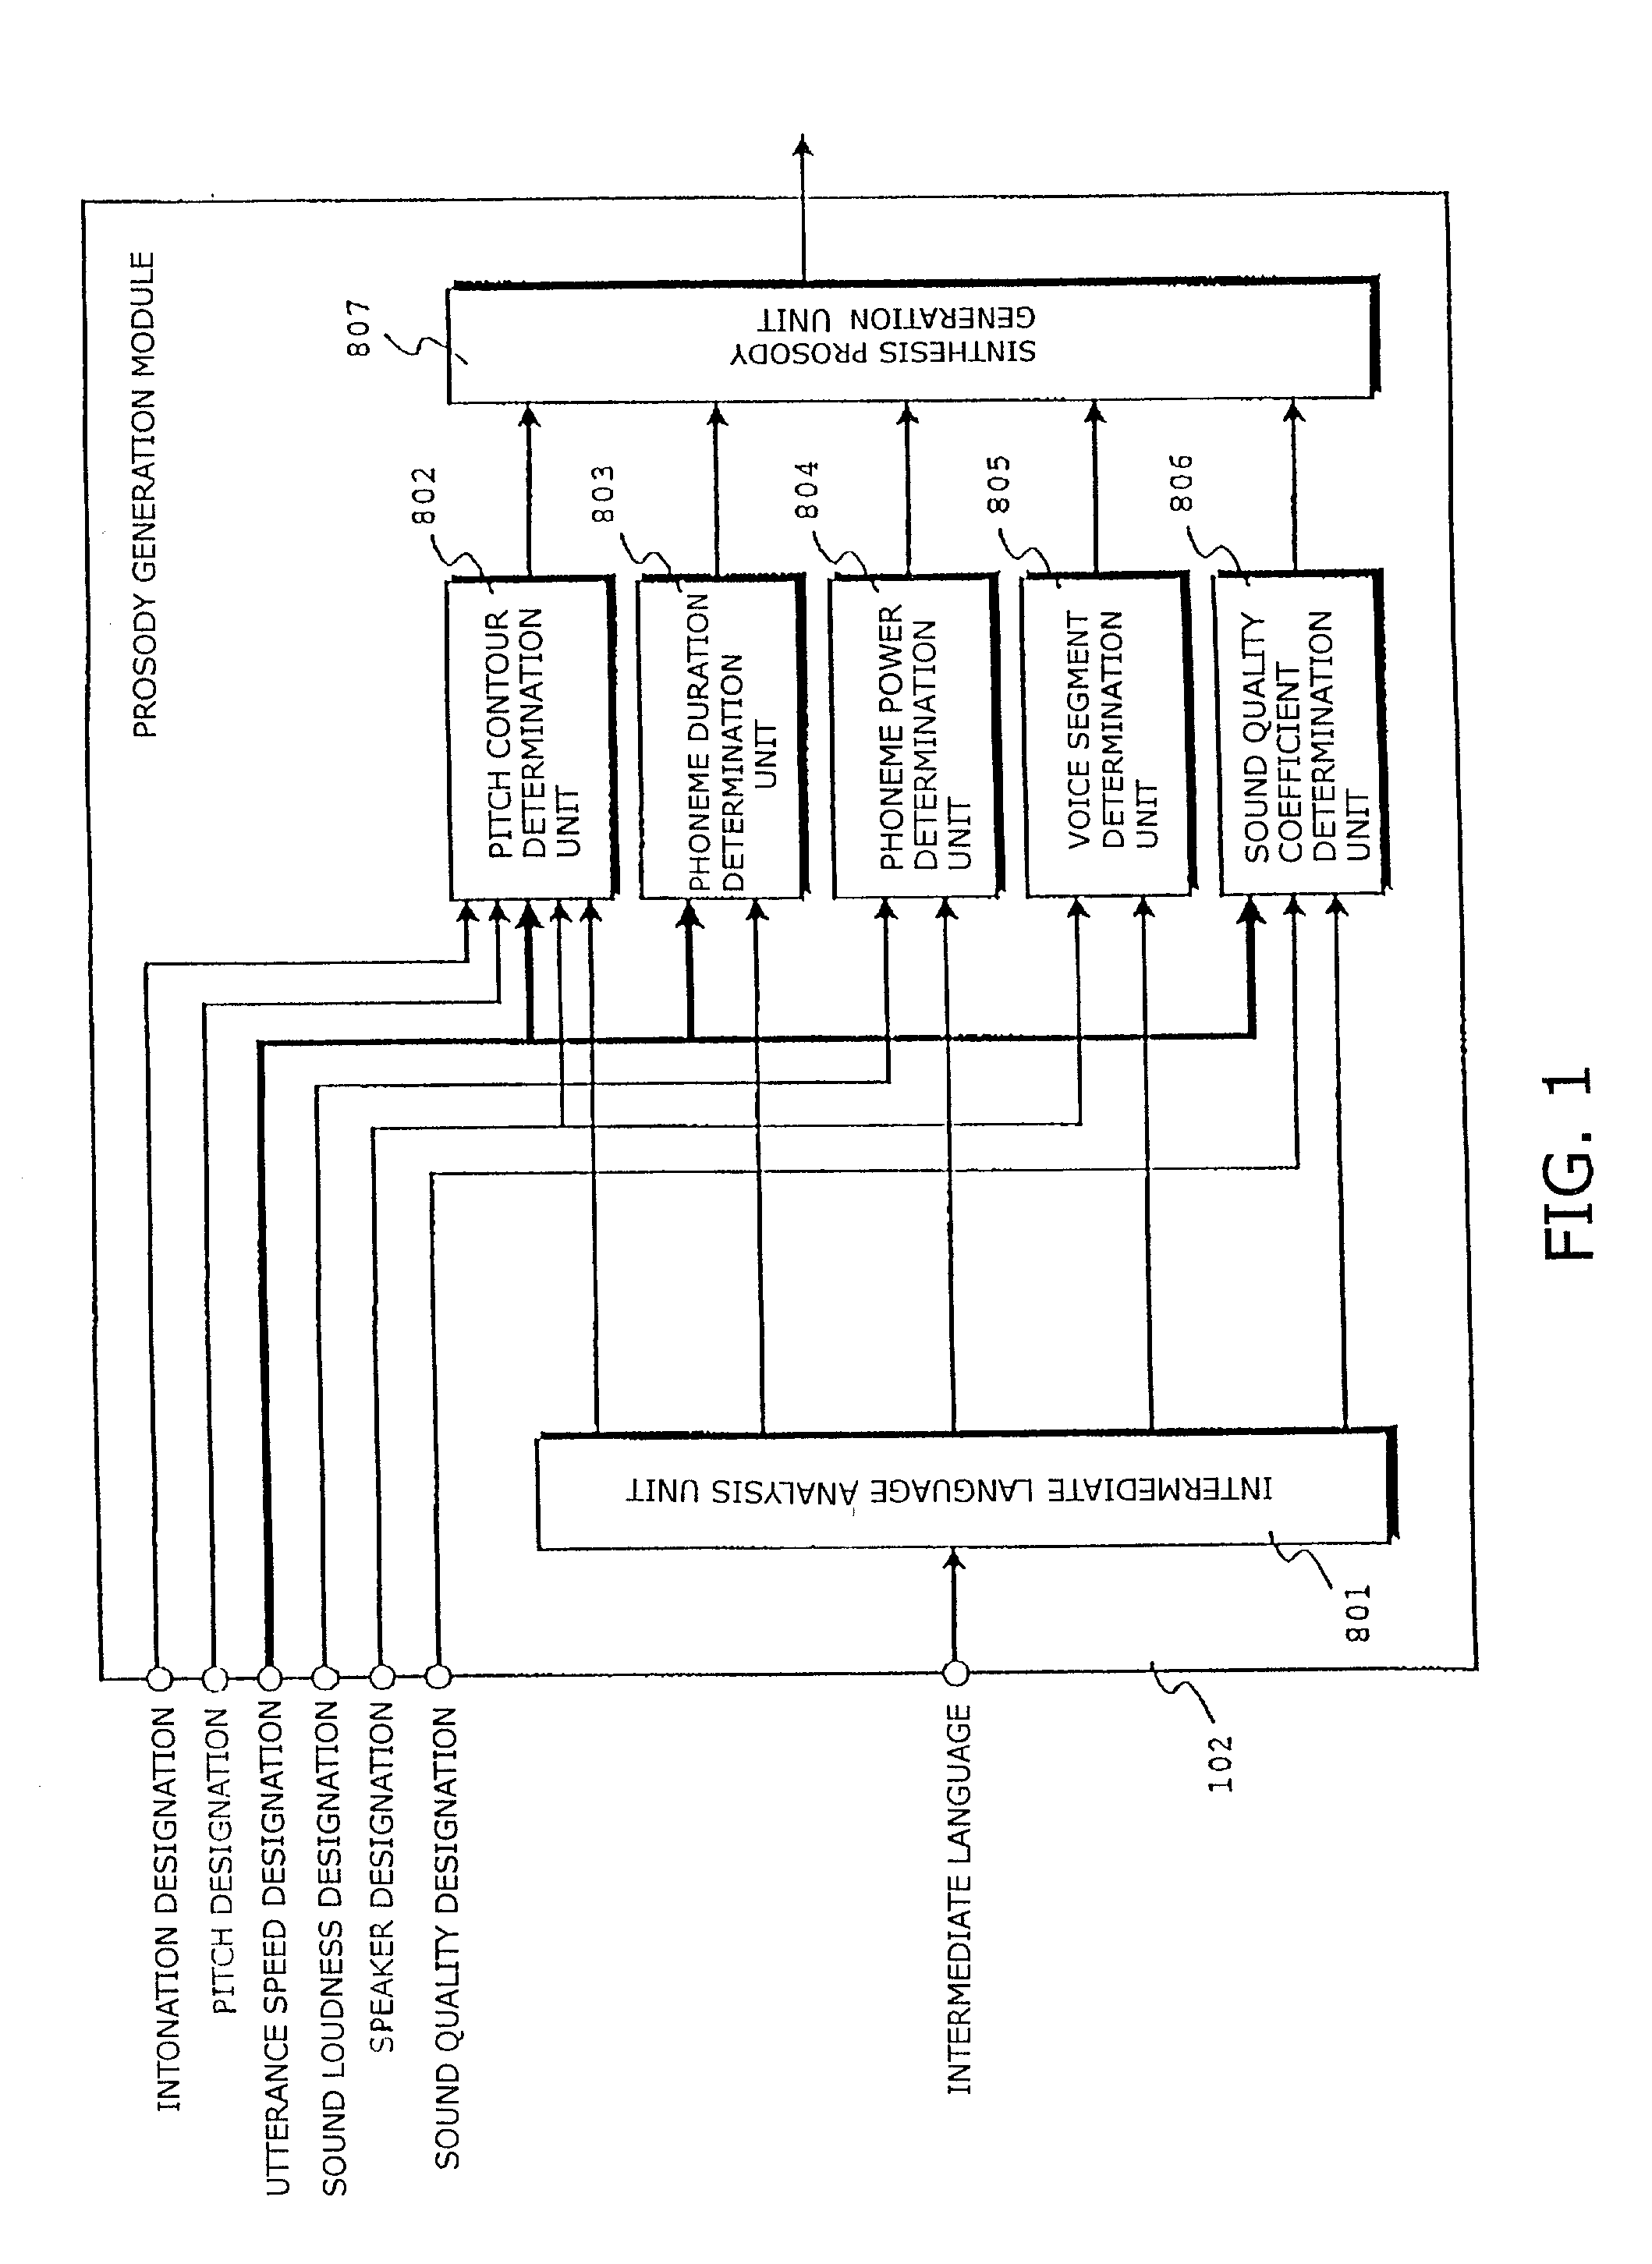 Method of controlling high-speed reading in a text-to-speech conversion system